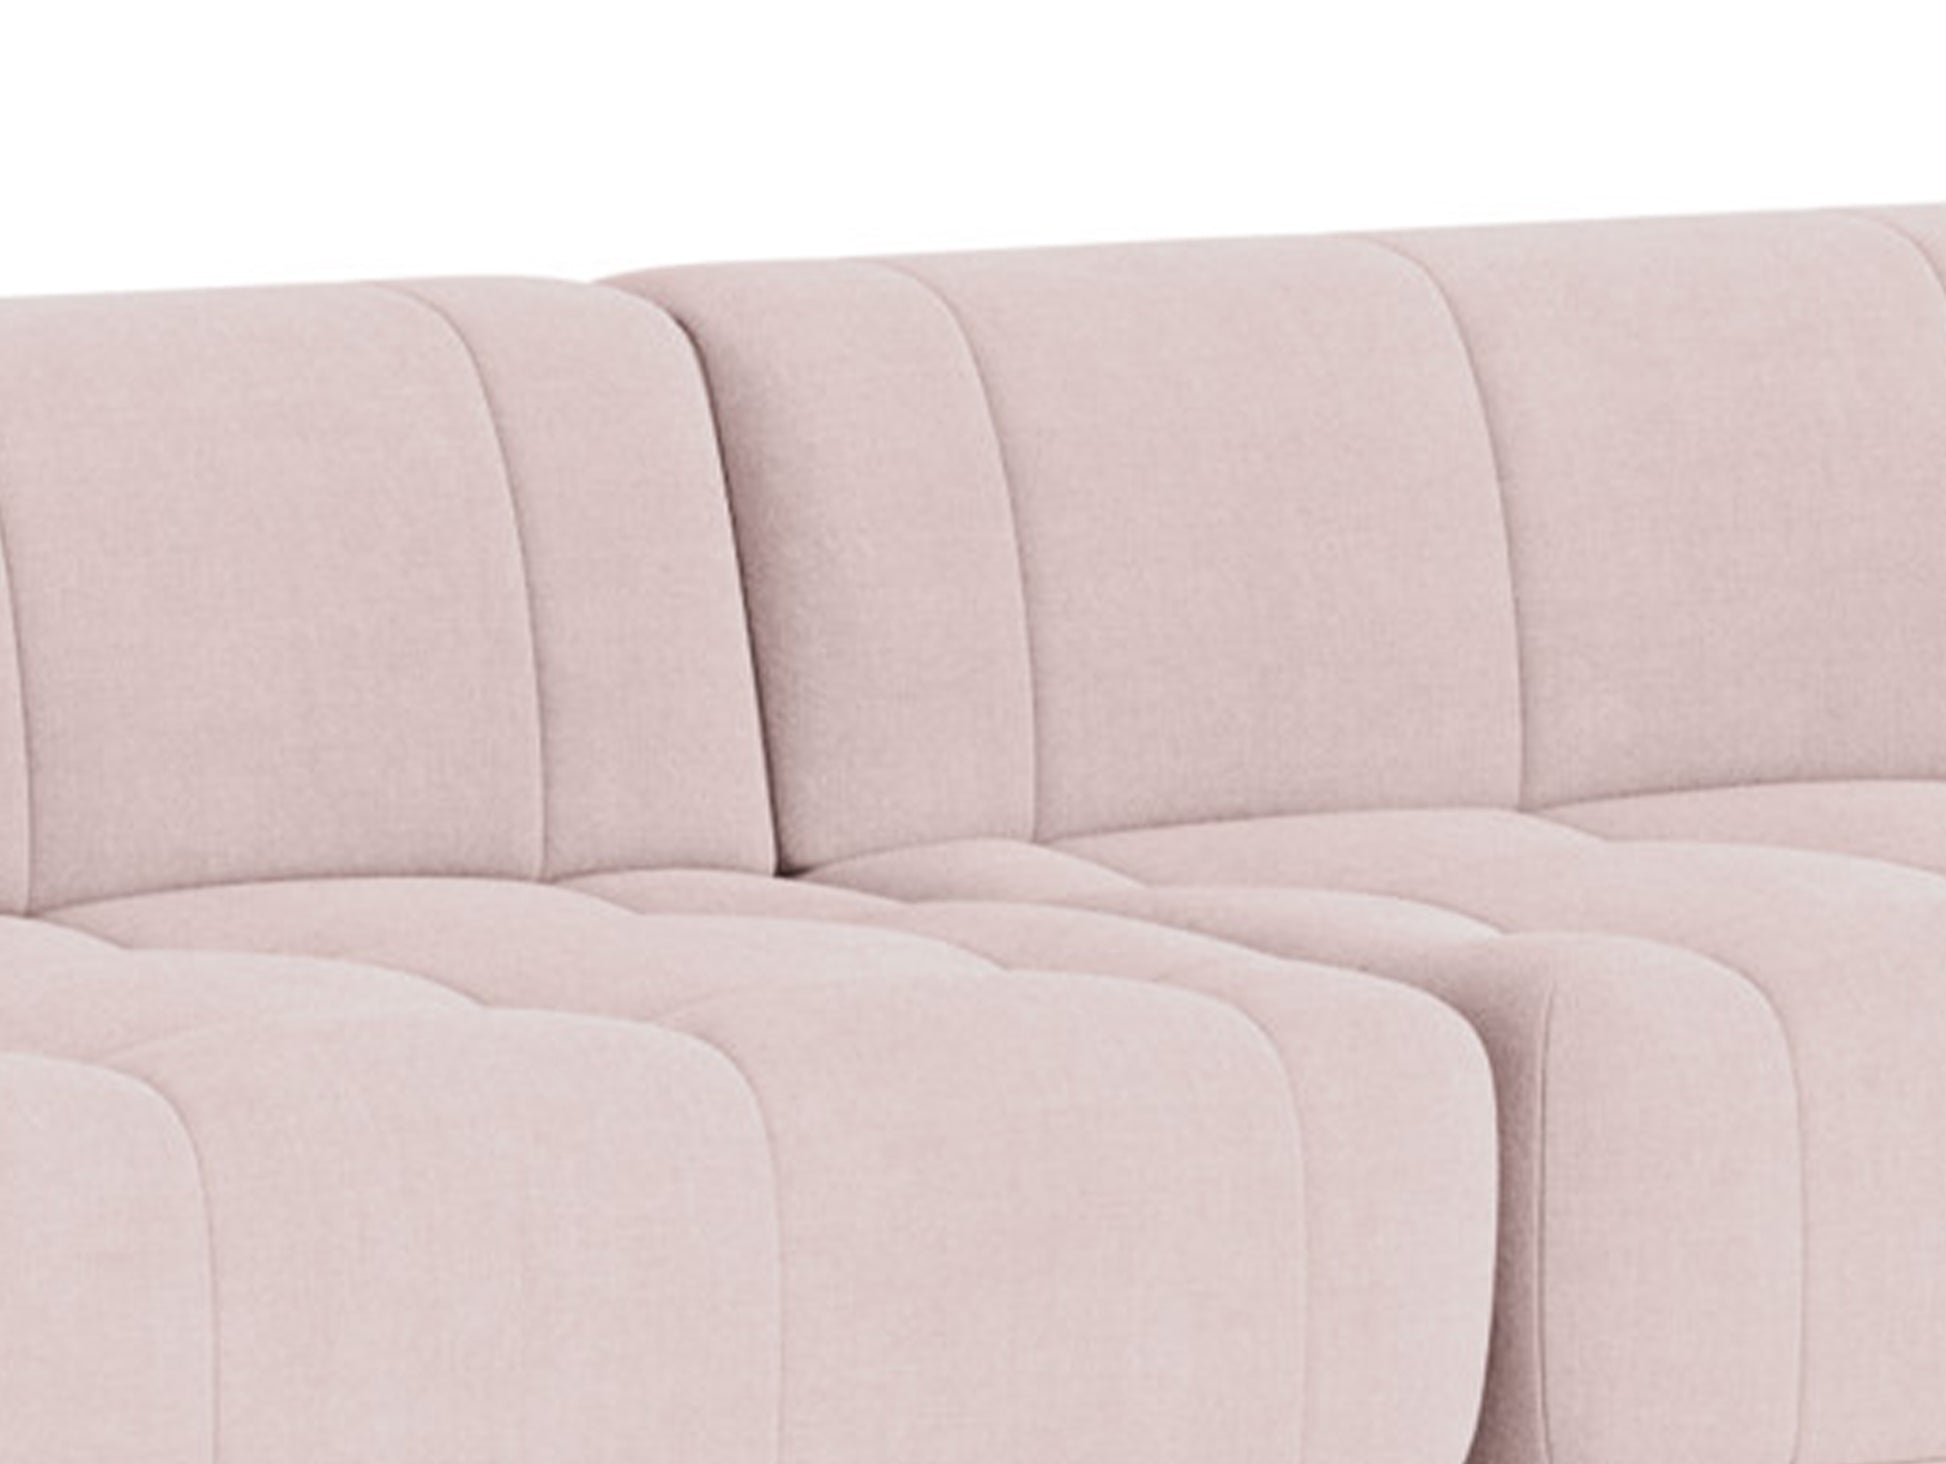 Quilton Sofa - Combination 27 by HAY / Combintion 27 / Mode 026